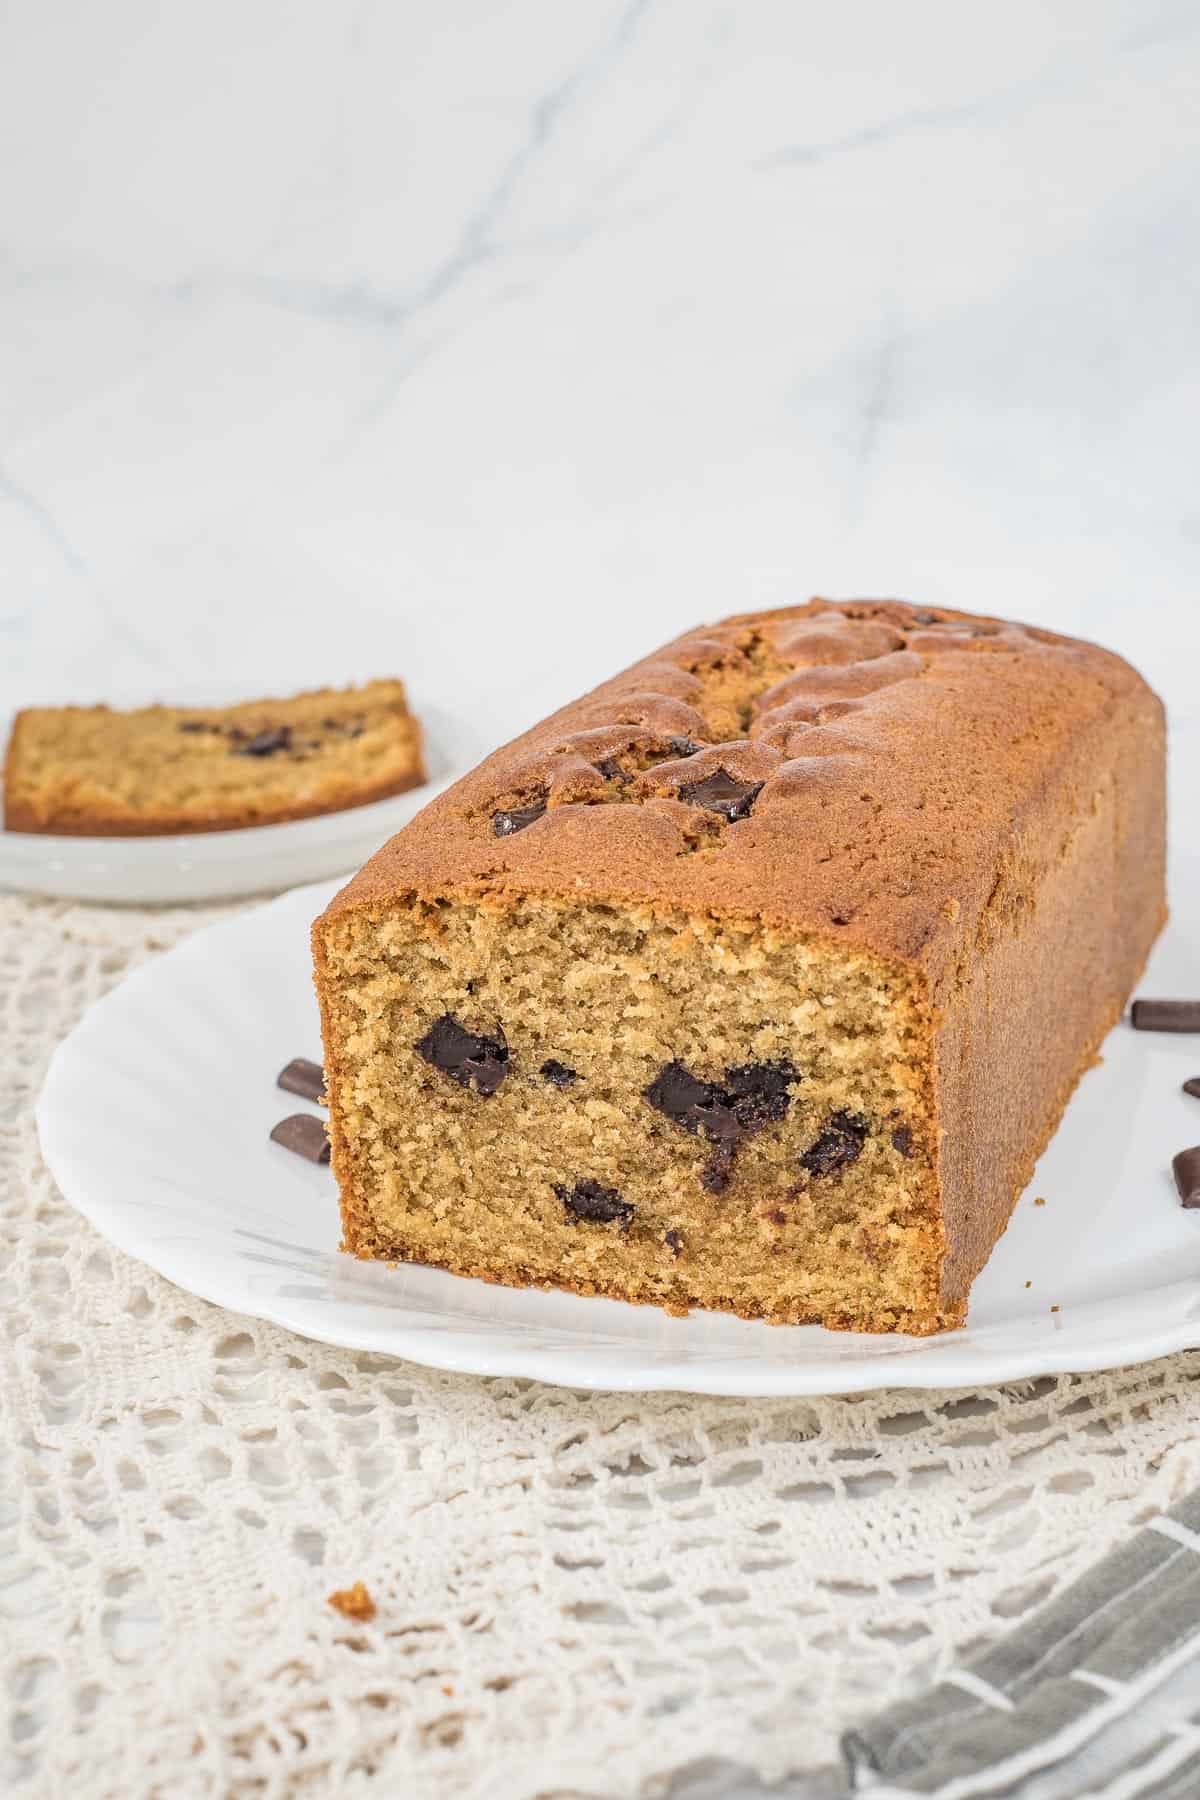 The front view of an instant coffee cake with a slice cut out.